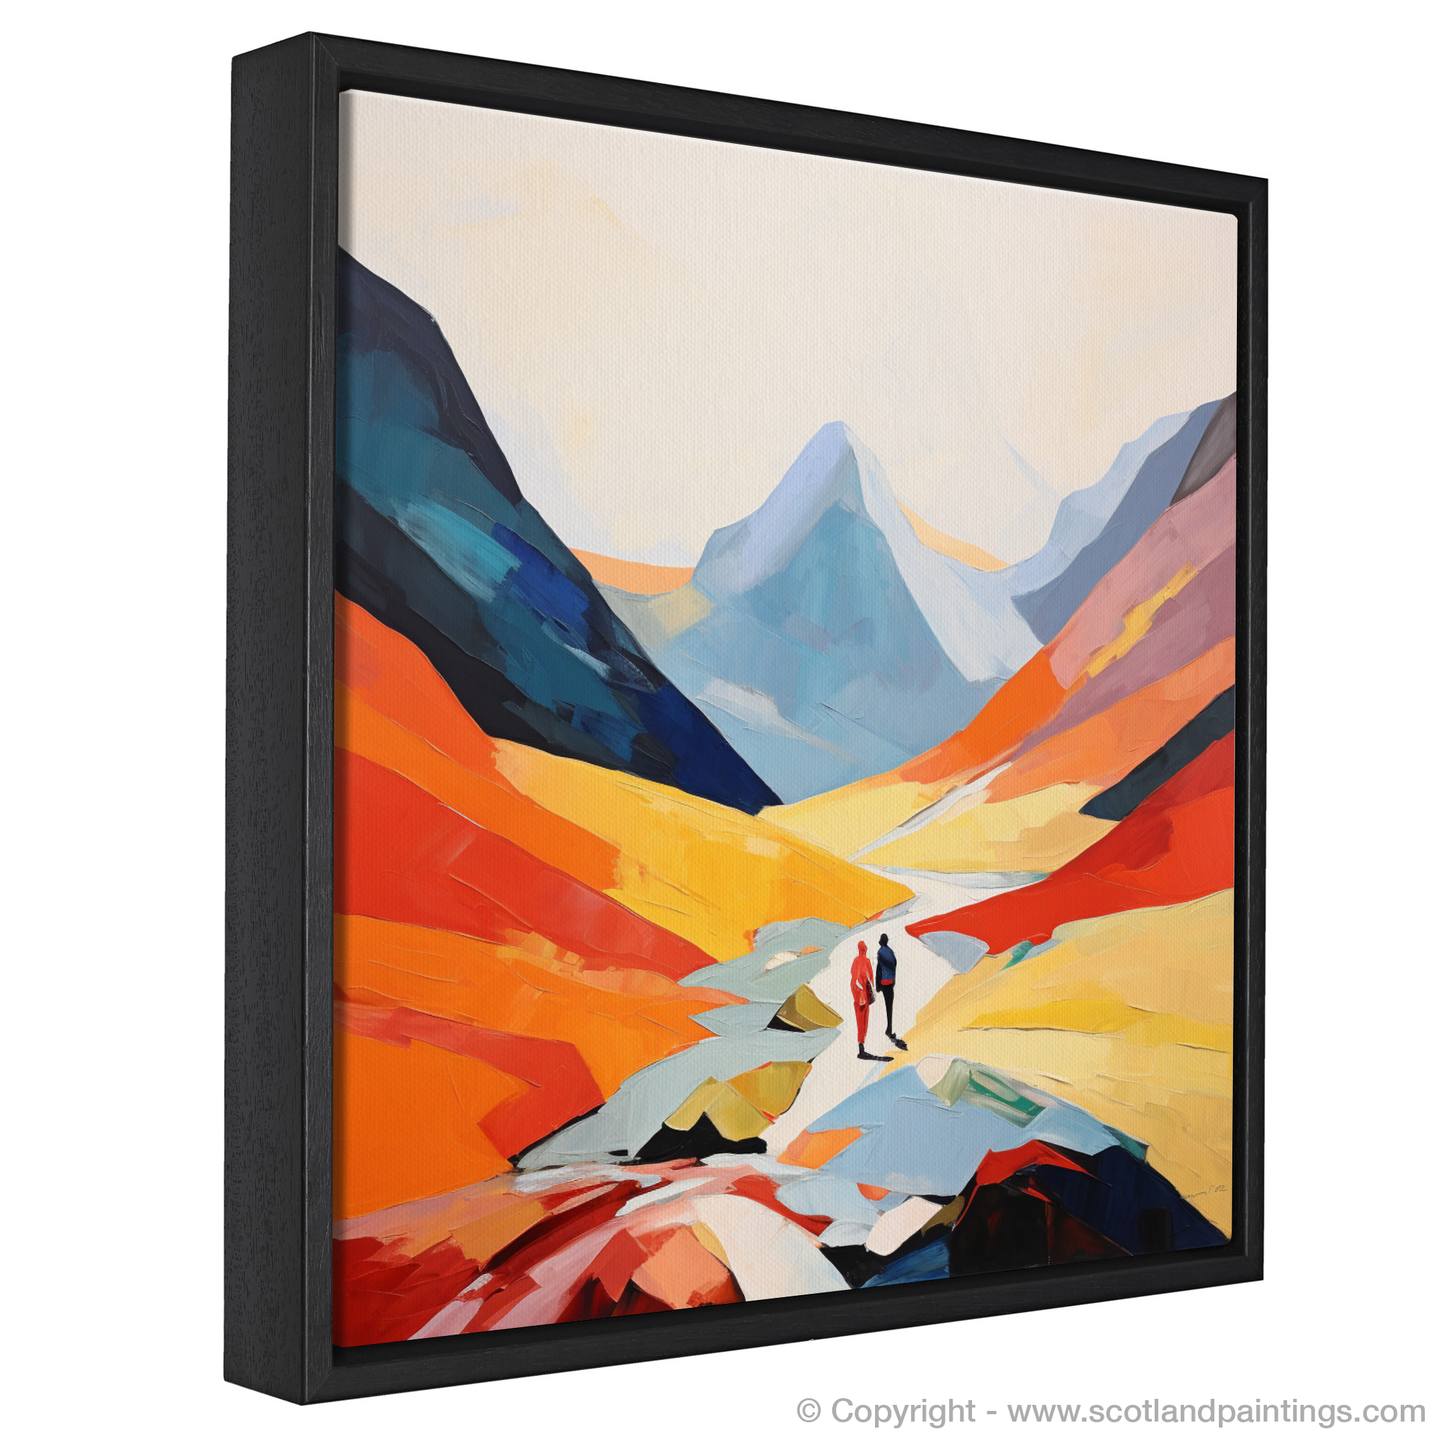 Painting and Art Print of Hikers in Glencoe entitled "Minimalist Majesty of Glencoe Hikers".